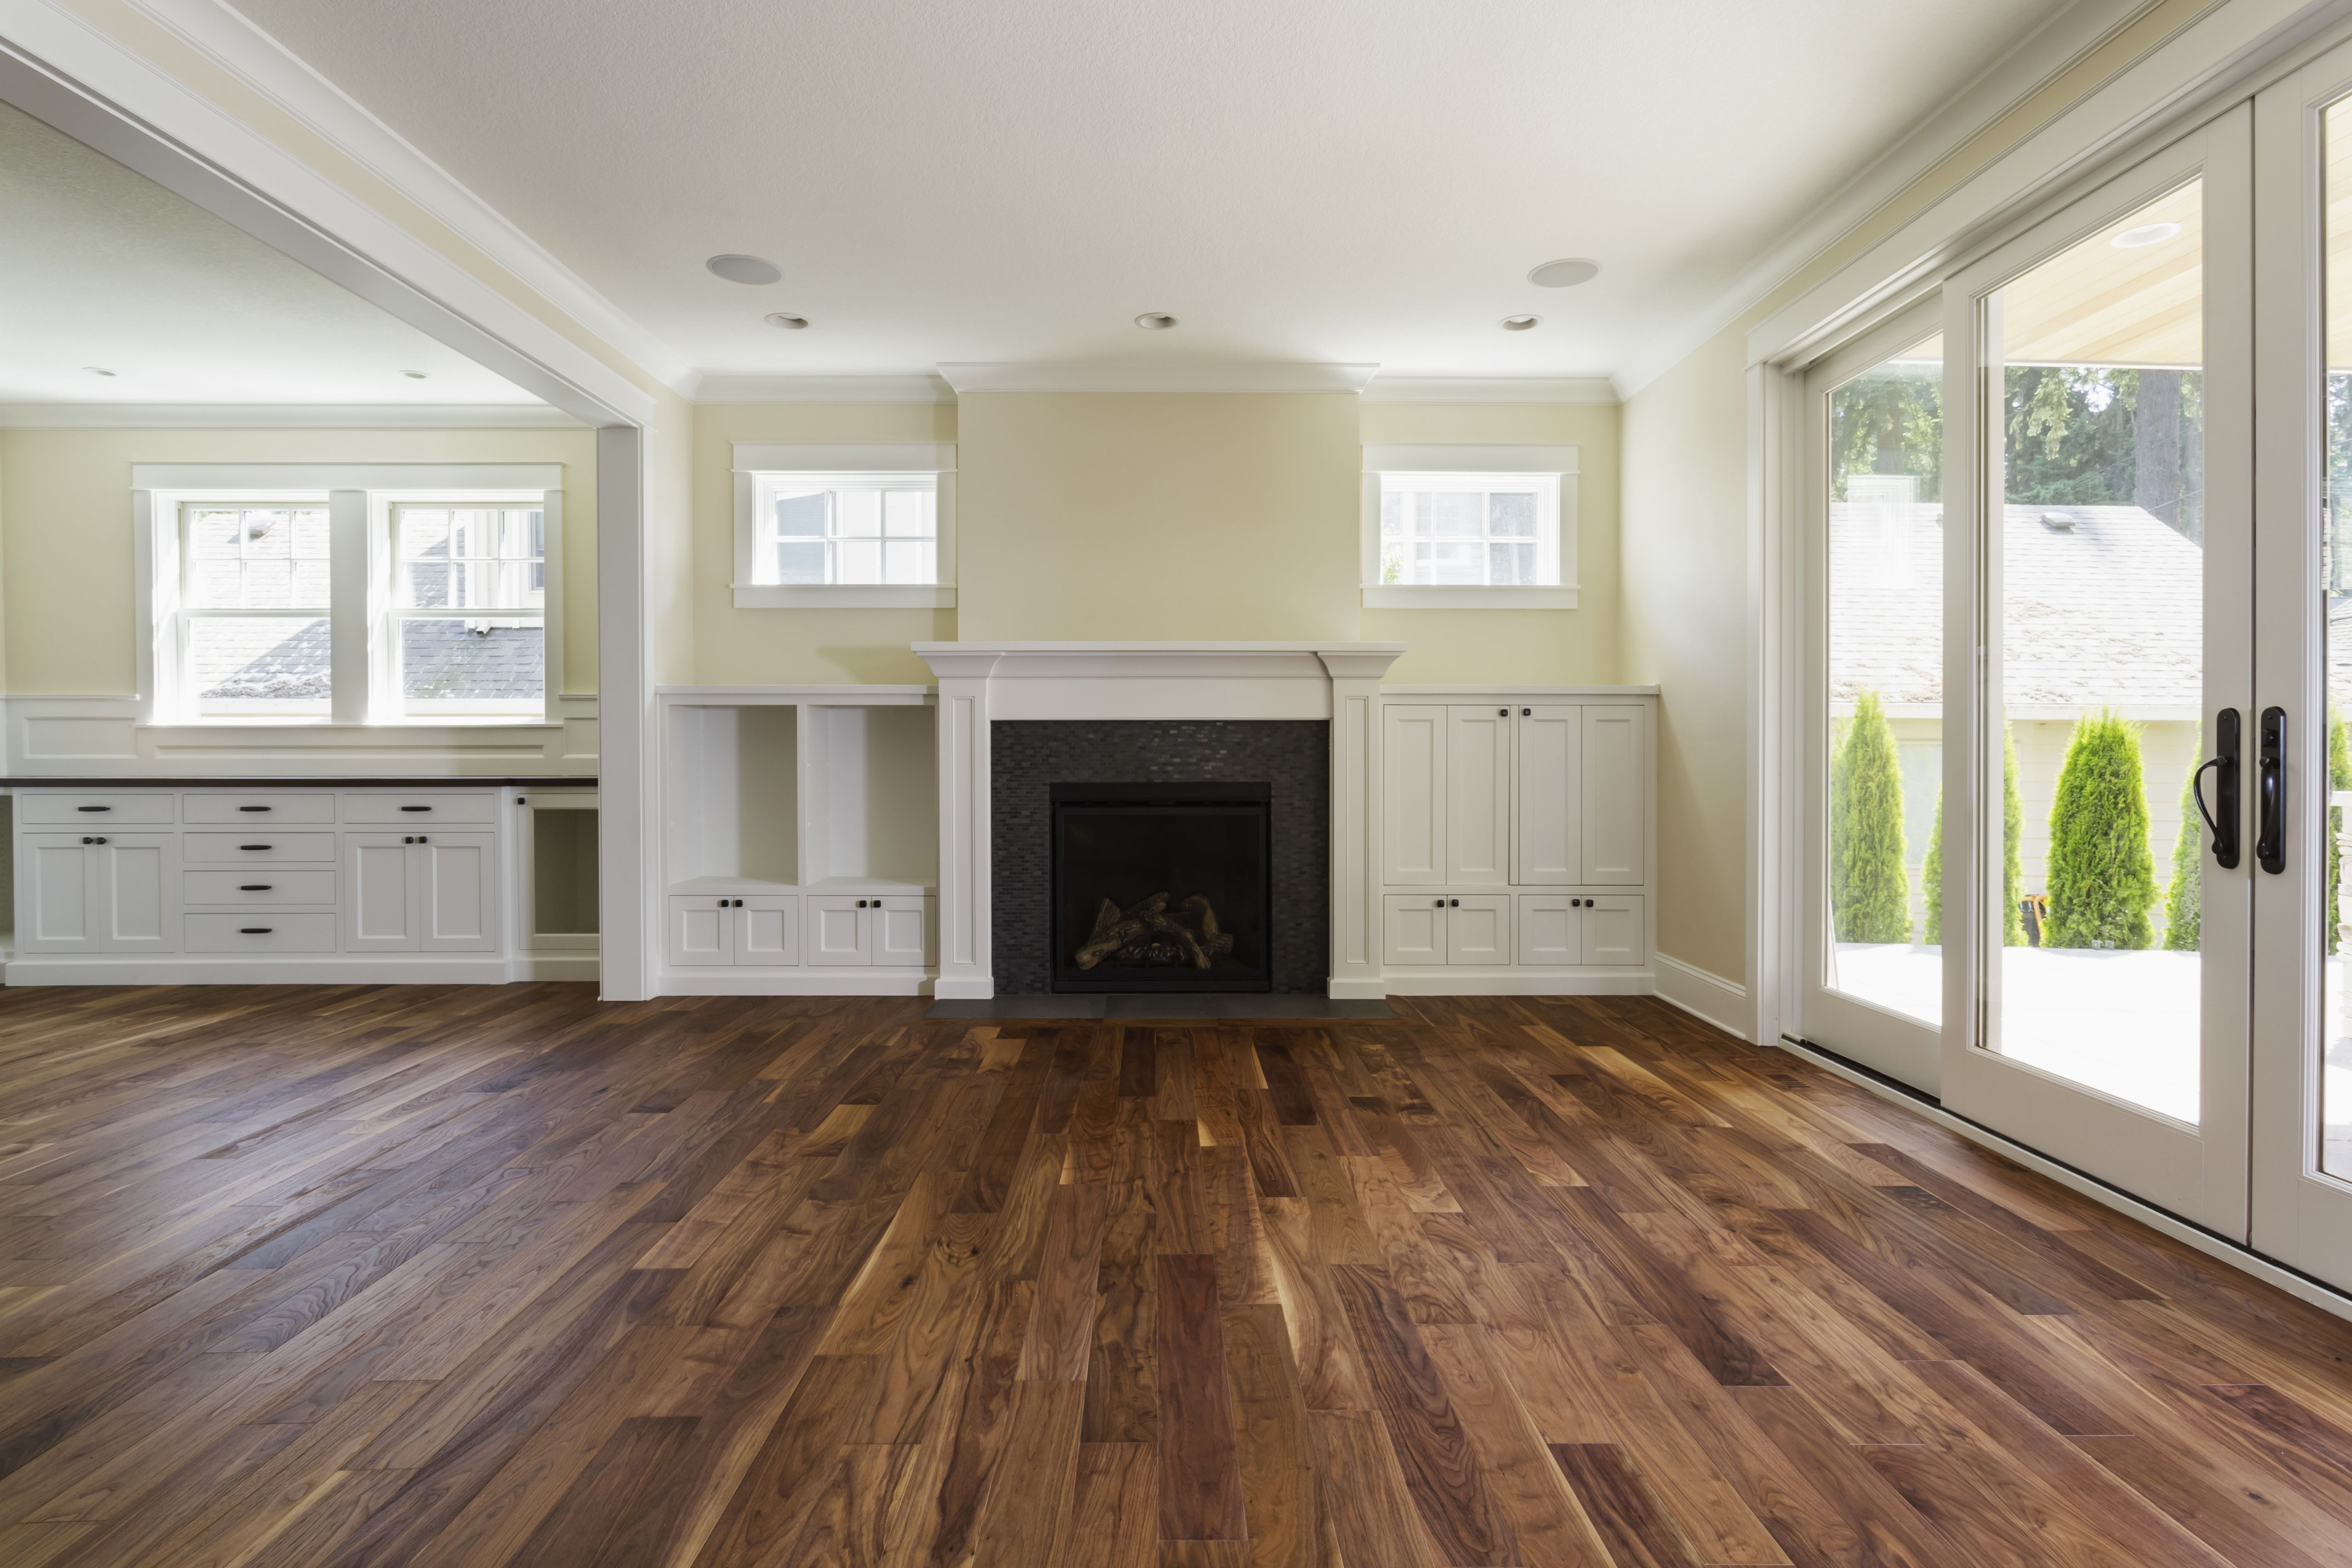 24 Ideal How to Clean Prefinished Hardwood Floors with Steam 2024 free download how to clean prefinished hardwood floors with steam of the pros and cons of prefinished hardwood flooring inside fireplace and built in shelves in living room 482143011 57bef8e33df78cc16e035